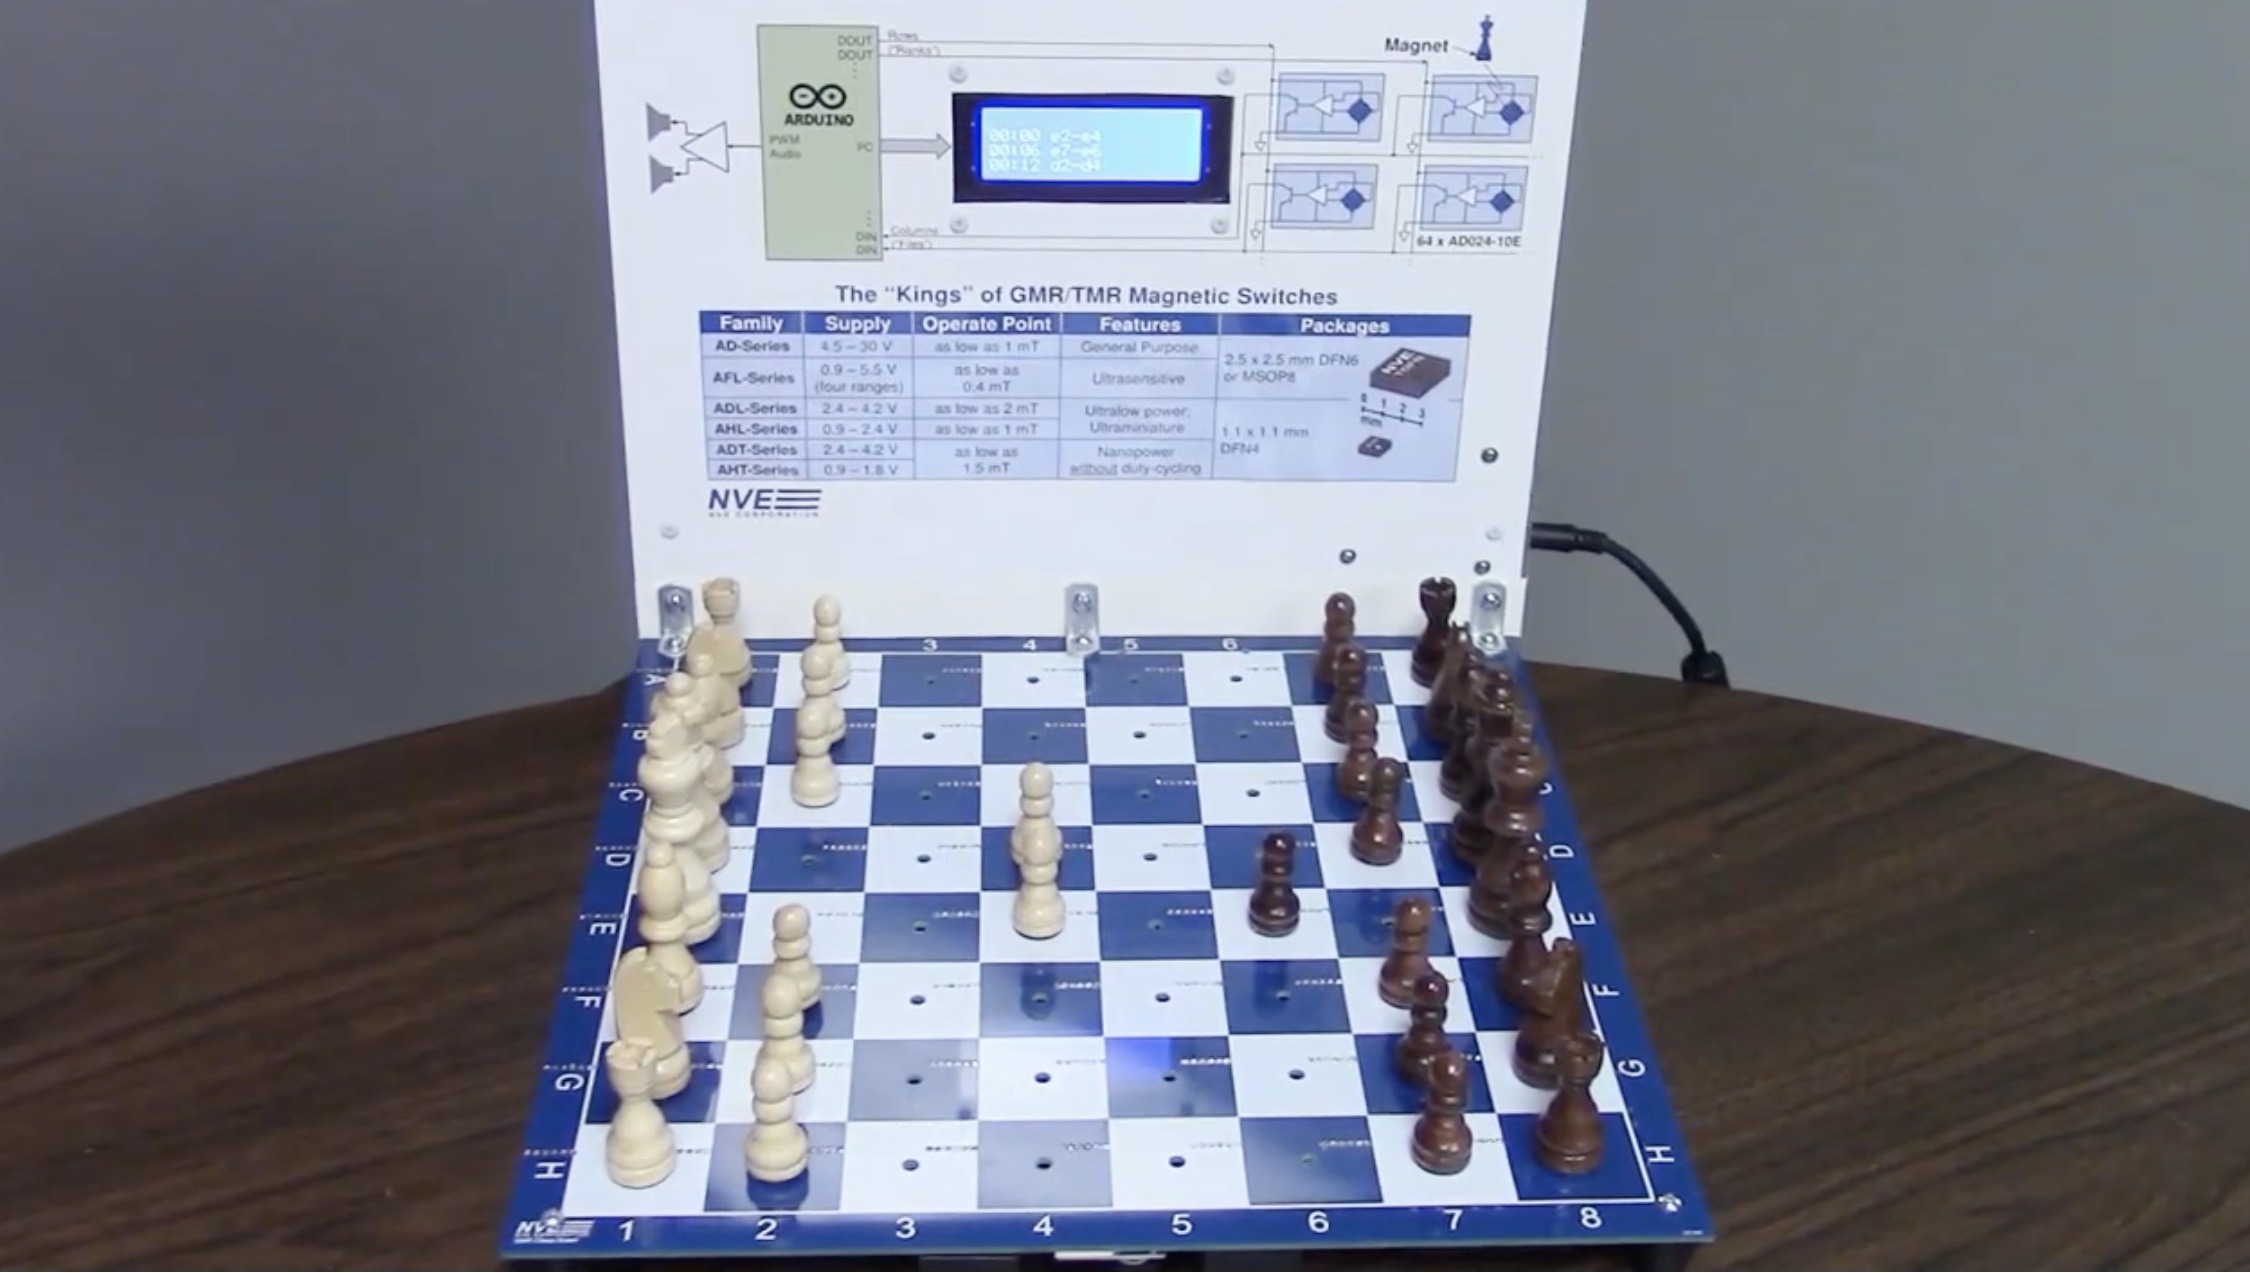 Practical magnetic switches make this electronic chessboard possible